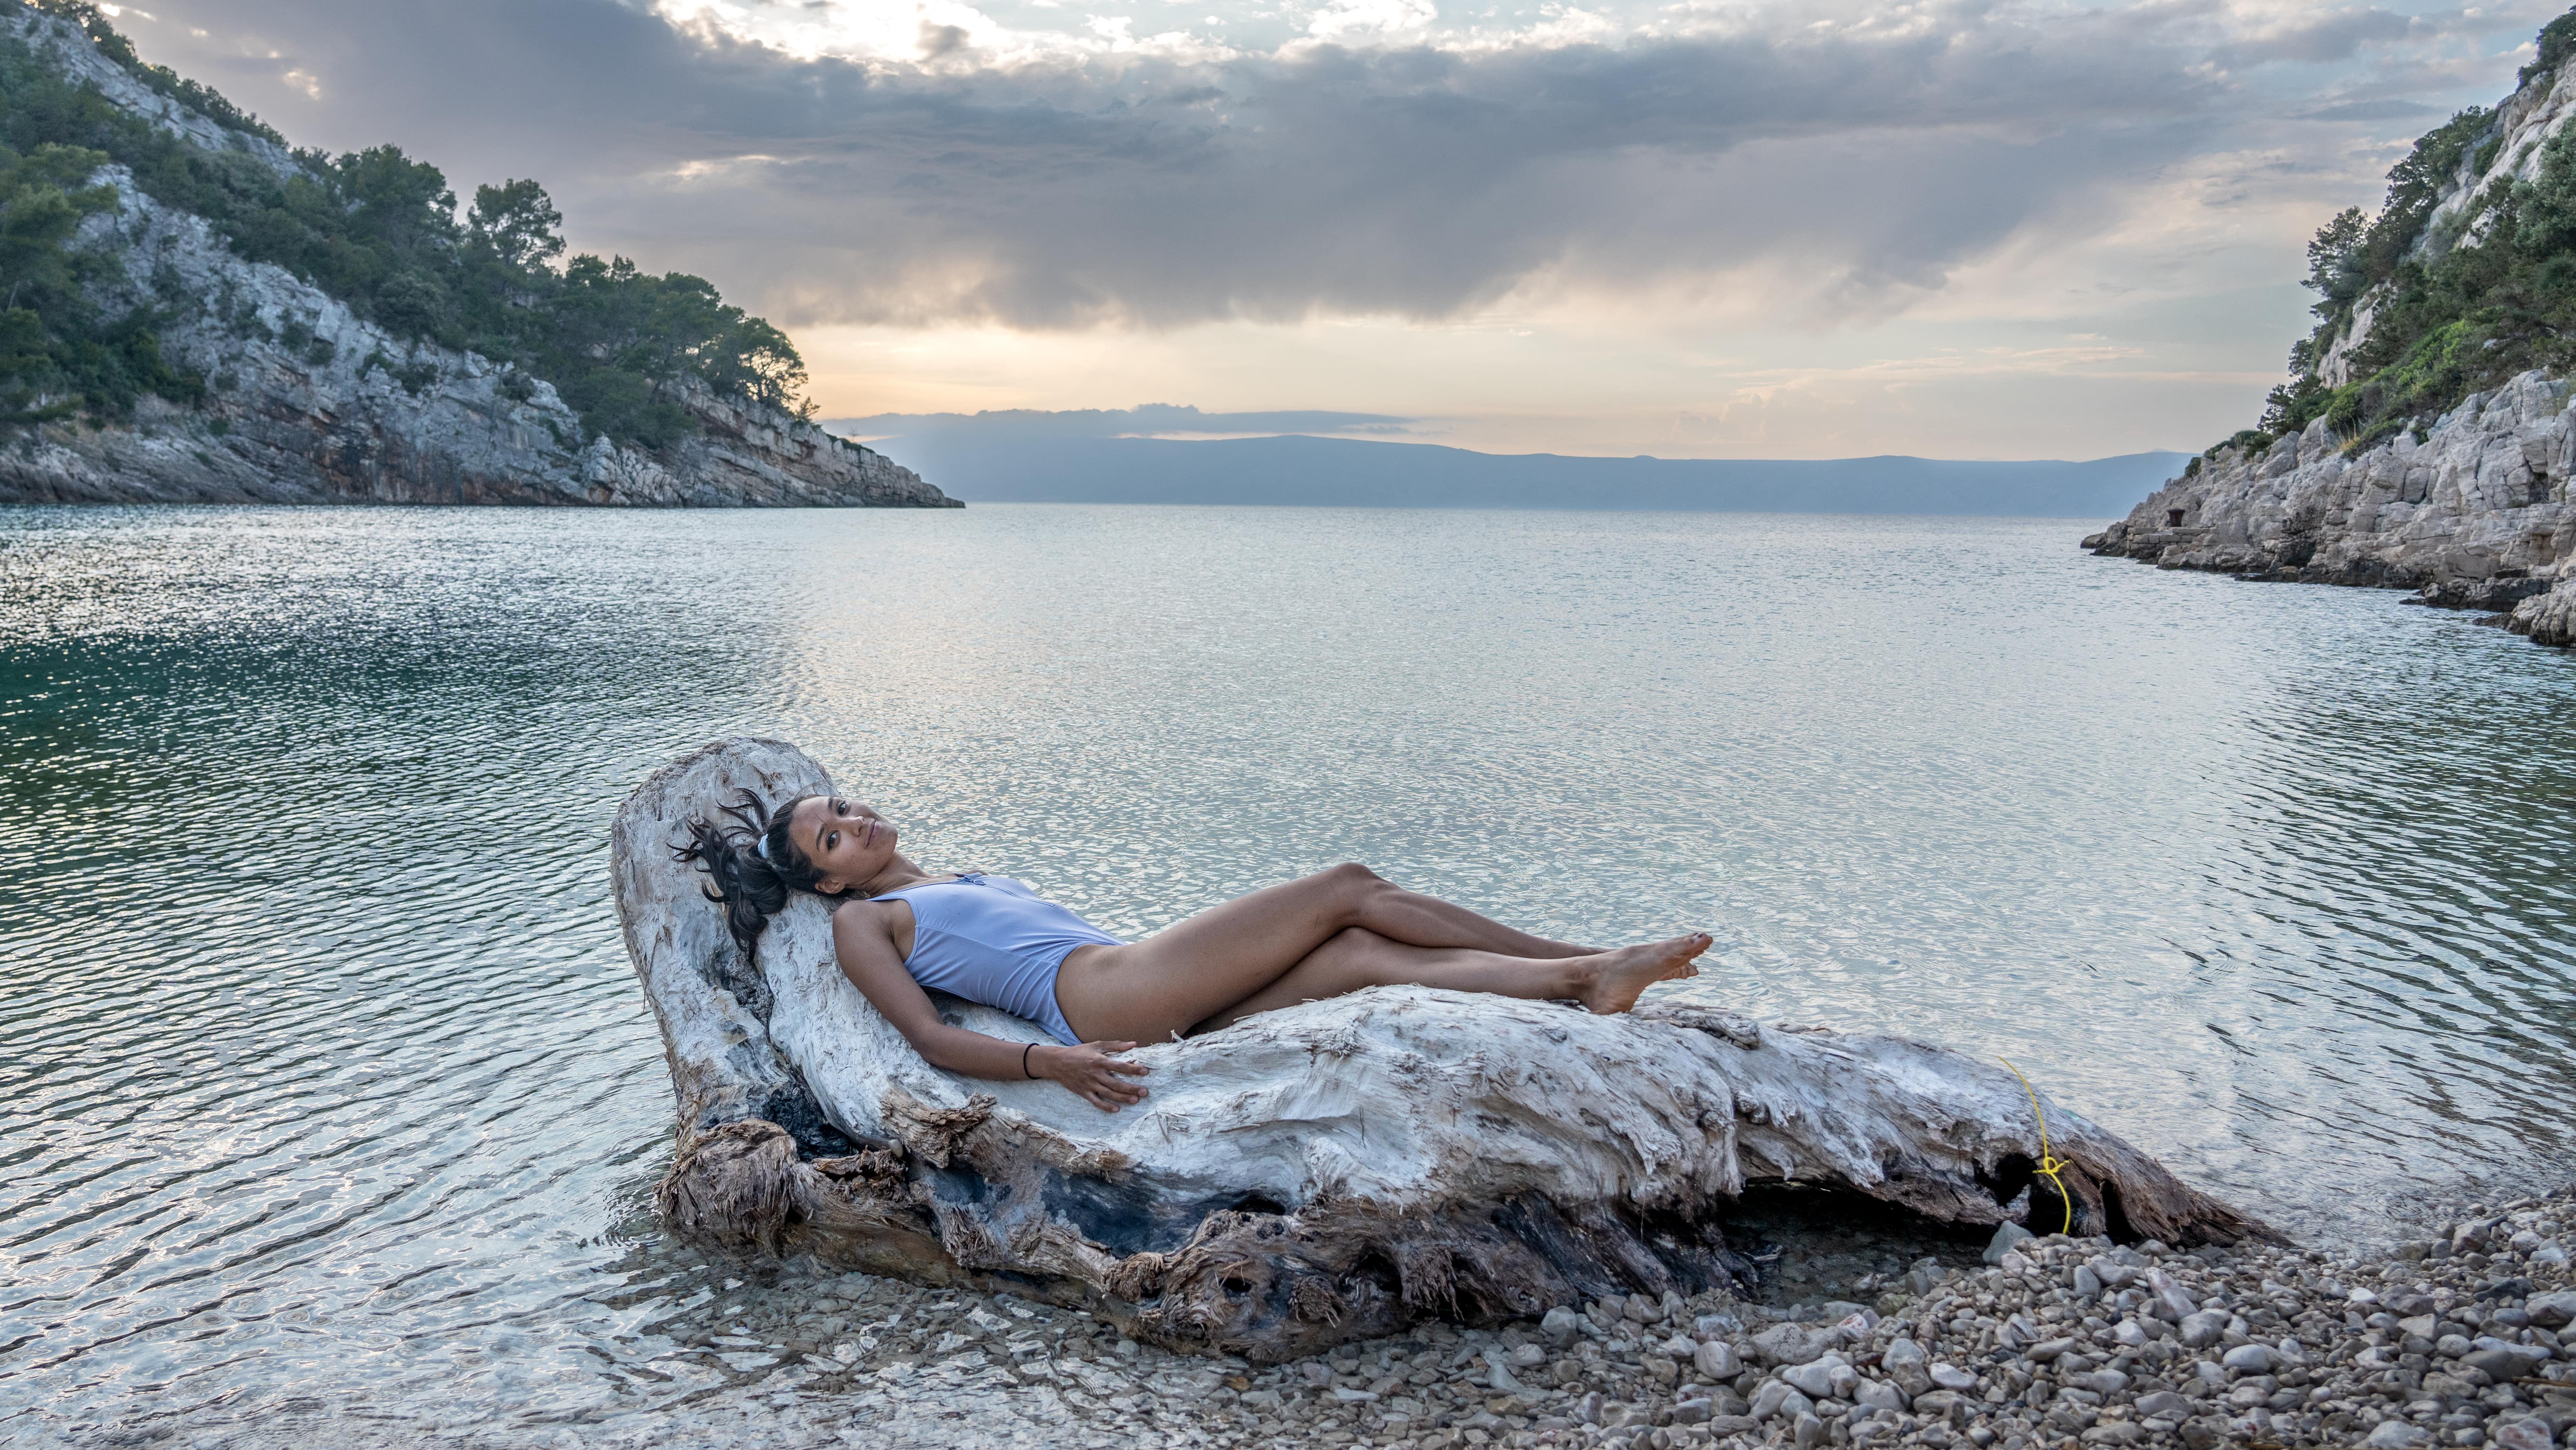 A person relaxing in the sea during a climbing trip to Croatia